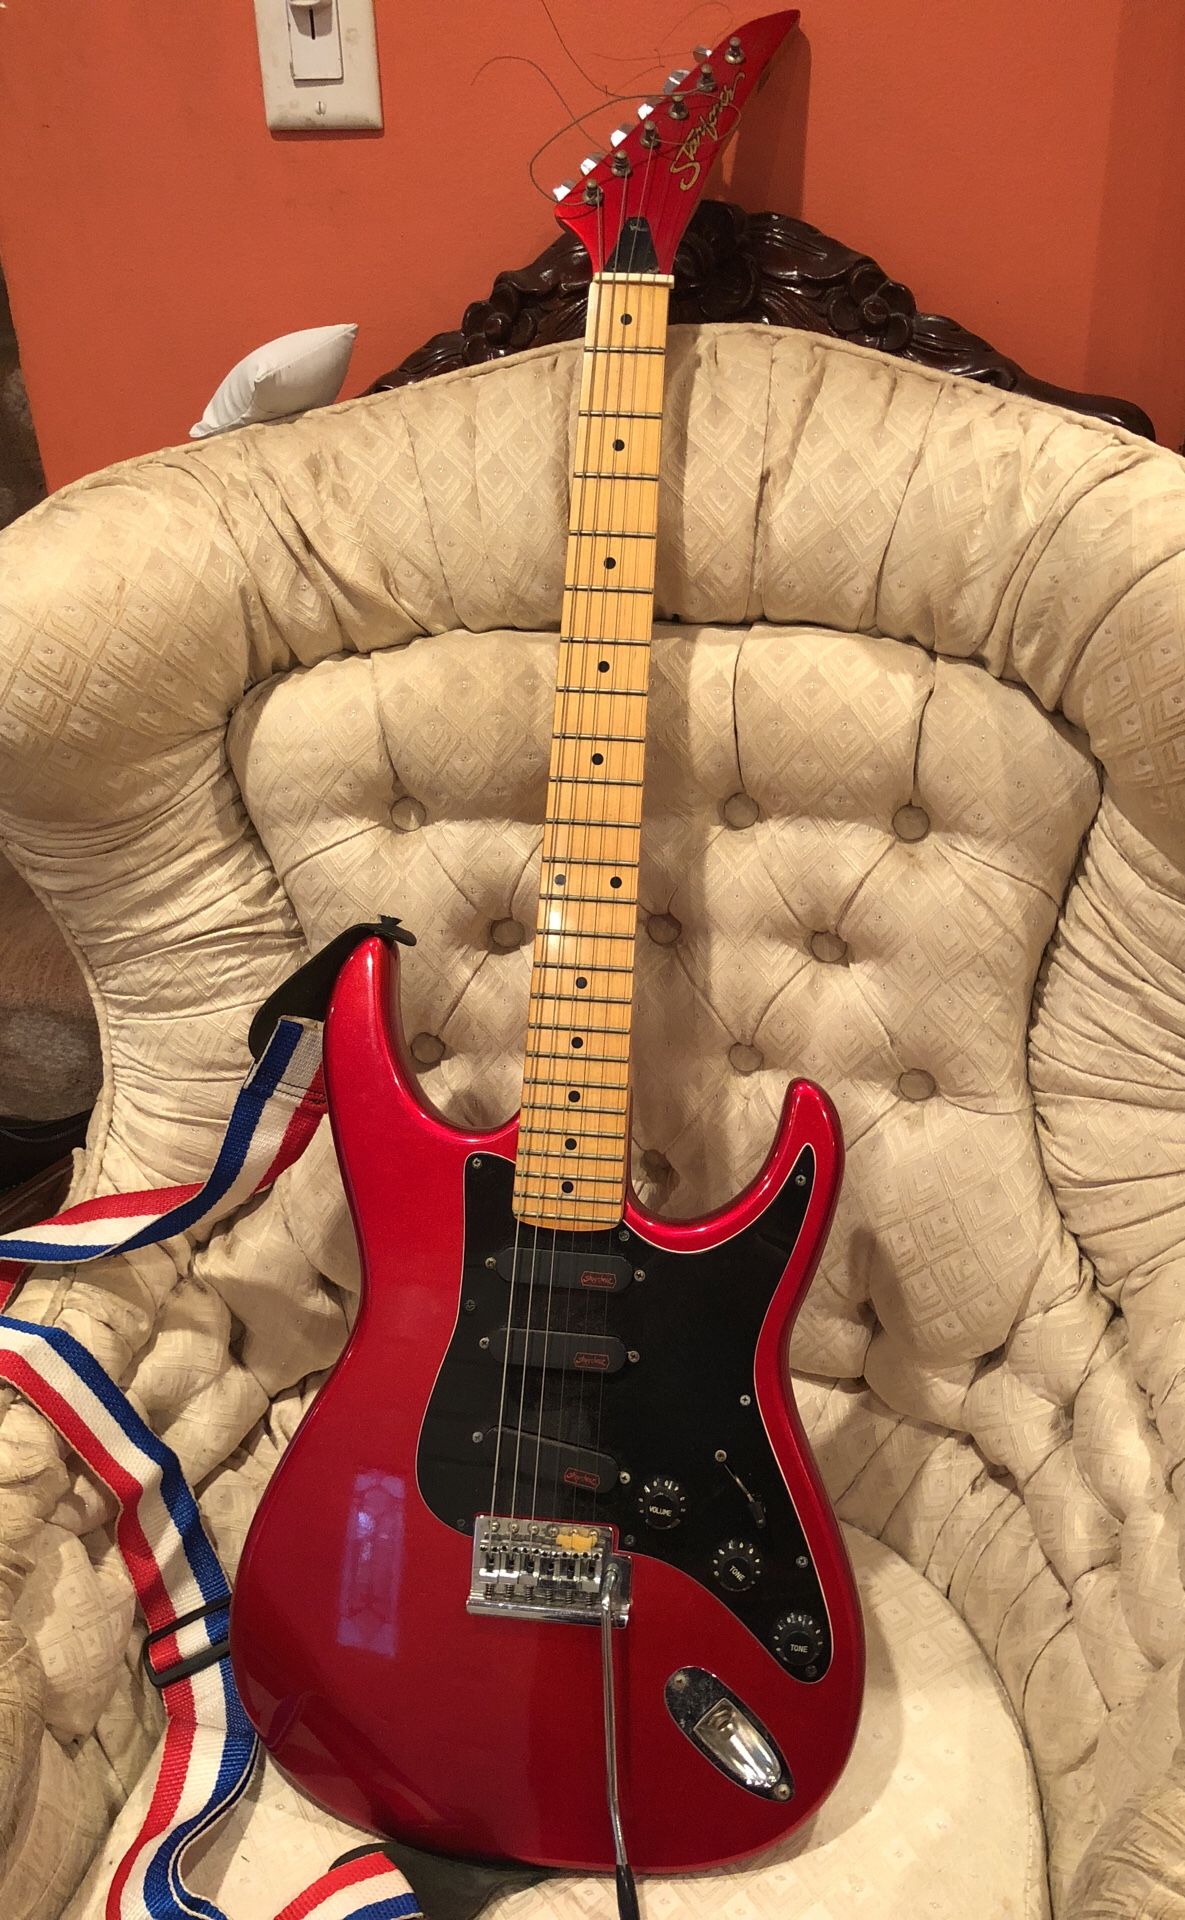 Beautiful guitar with amplifier, Never used. Excellent condition.